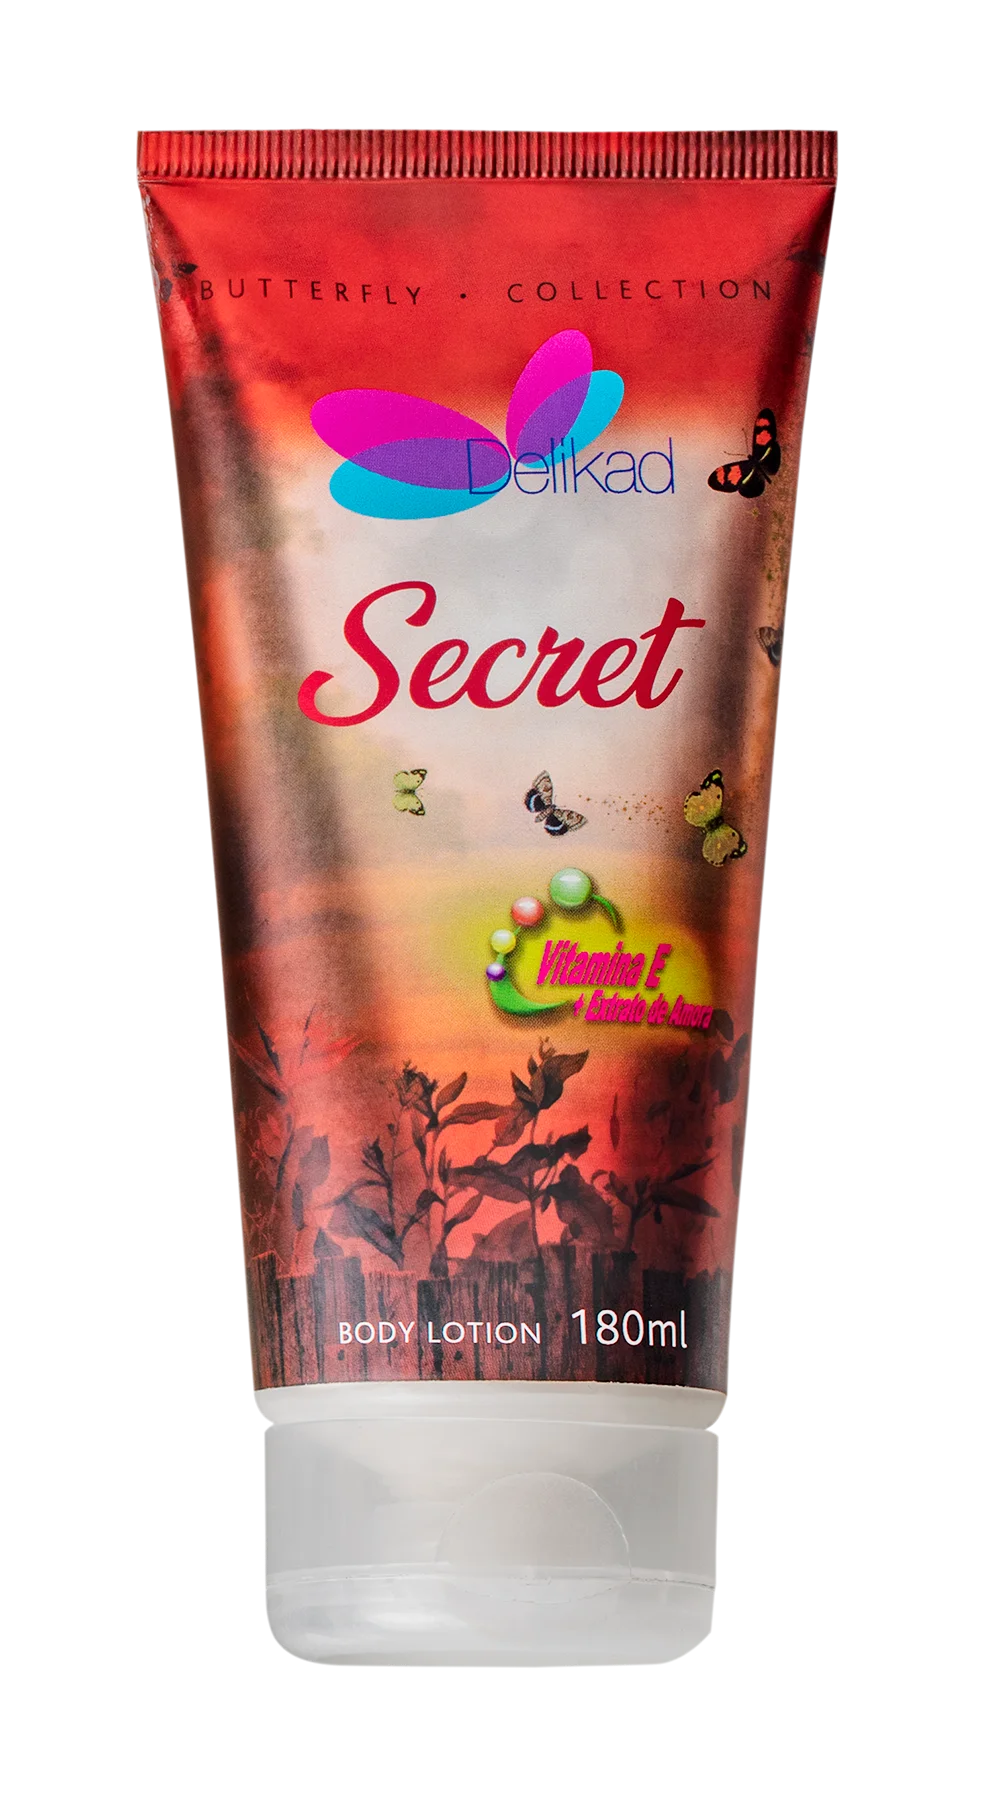 Delikad Butterfly Collection Body Lotion Secret